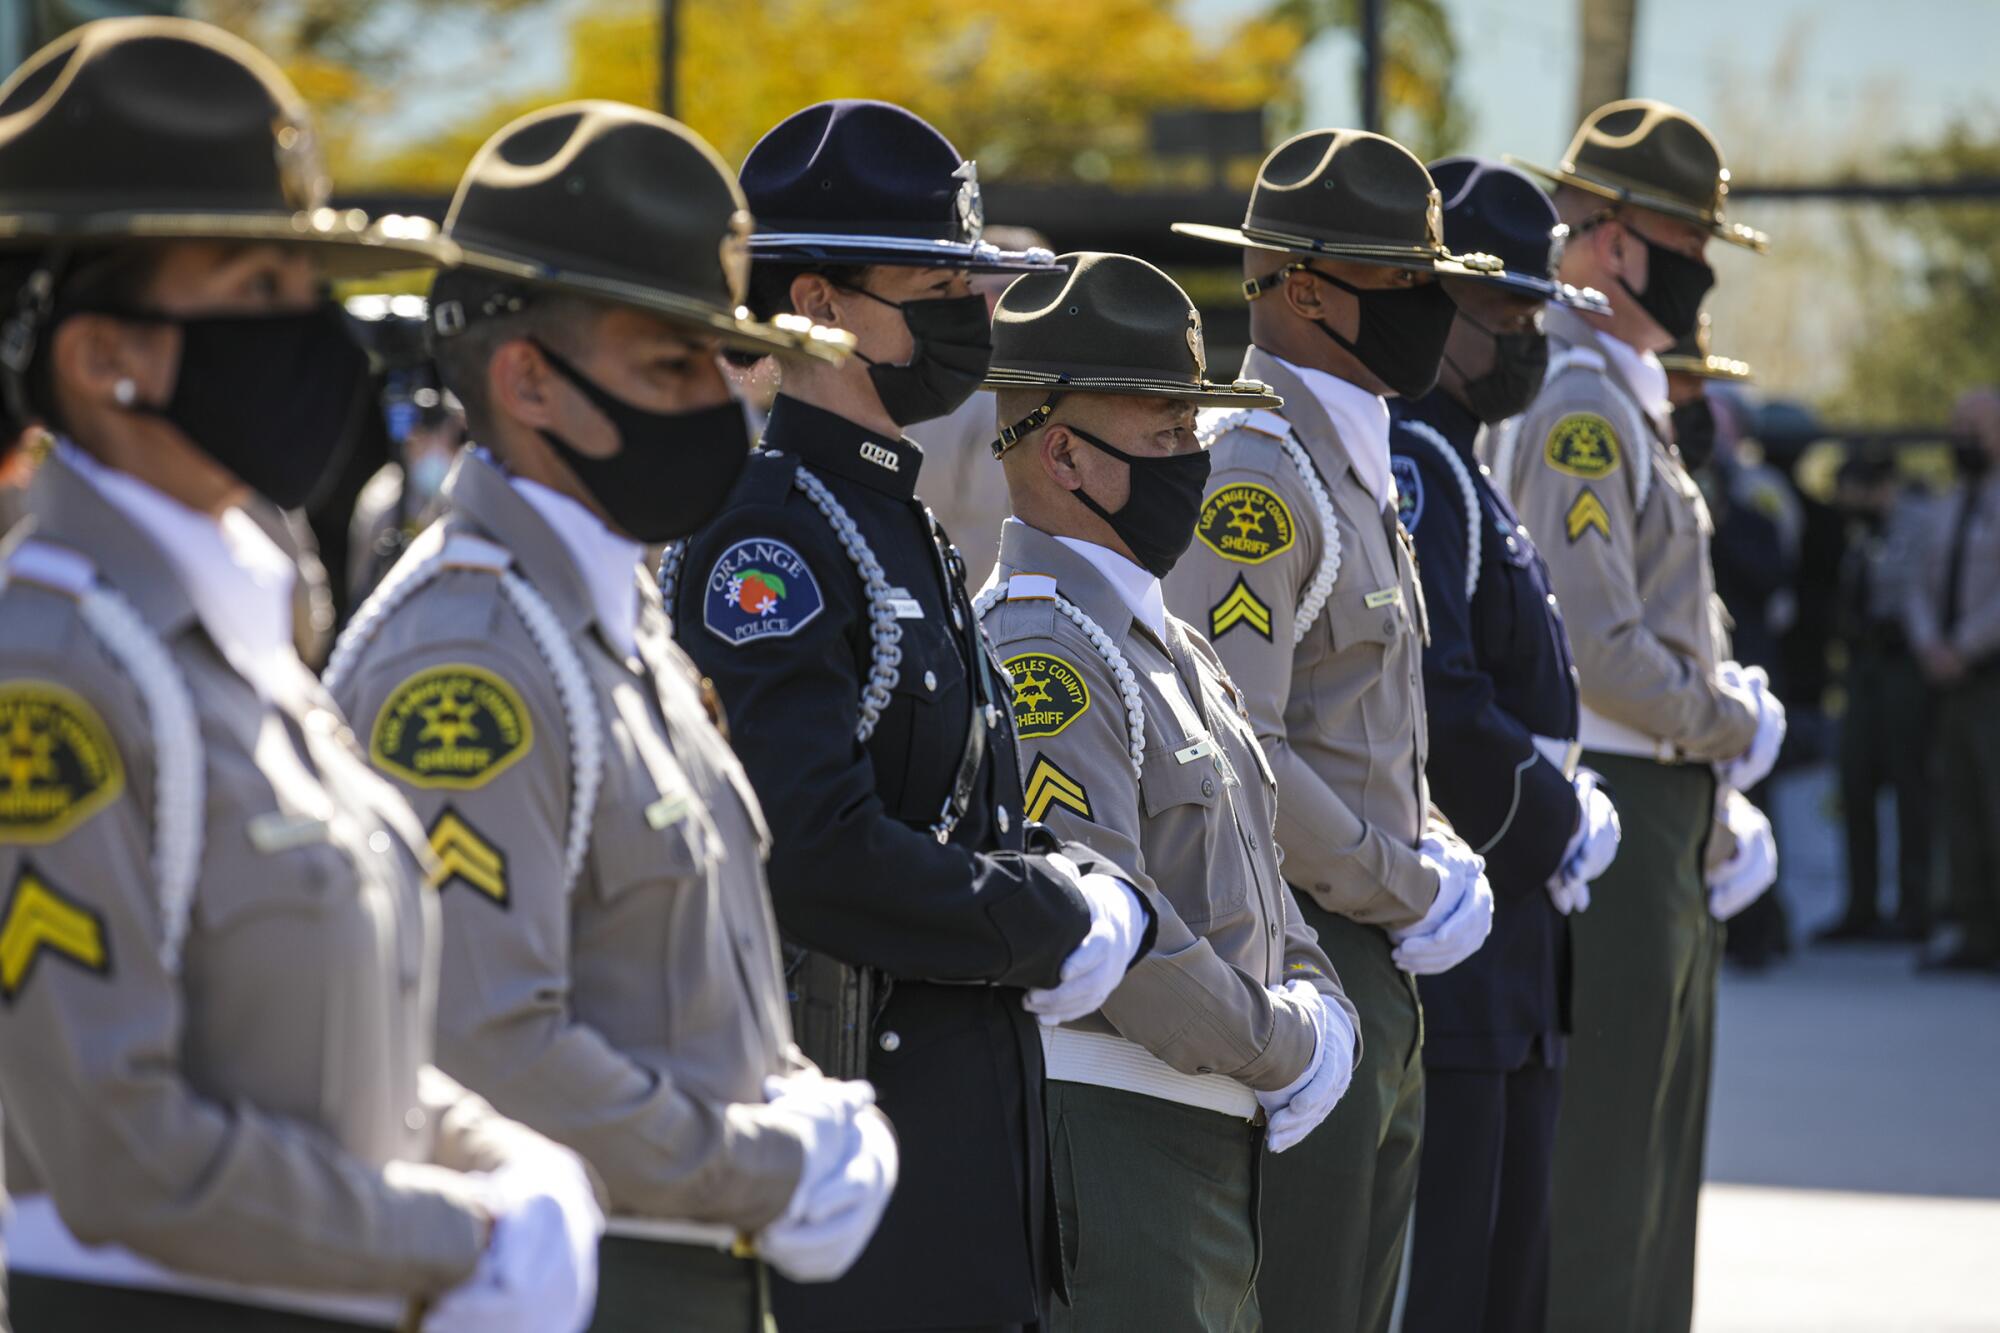 L.A. County Sheriff's Deputies were among attendees at the funeral services for Albanese.